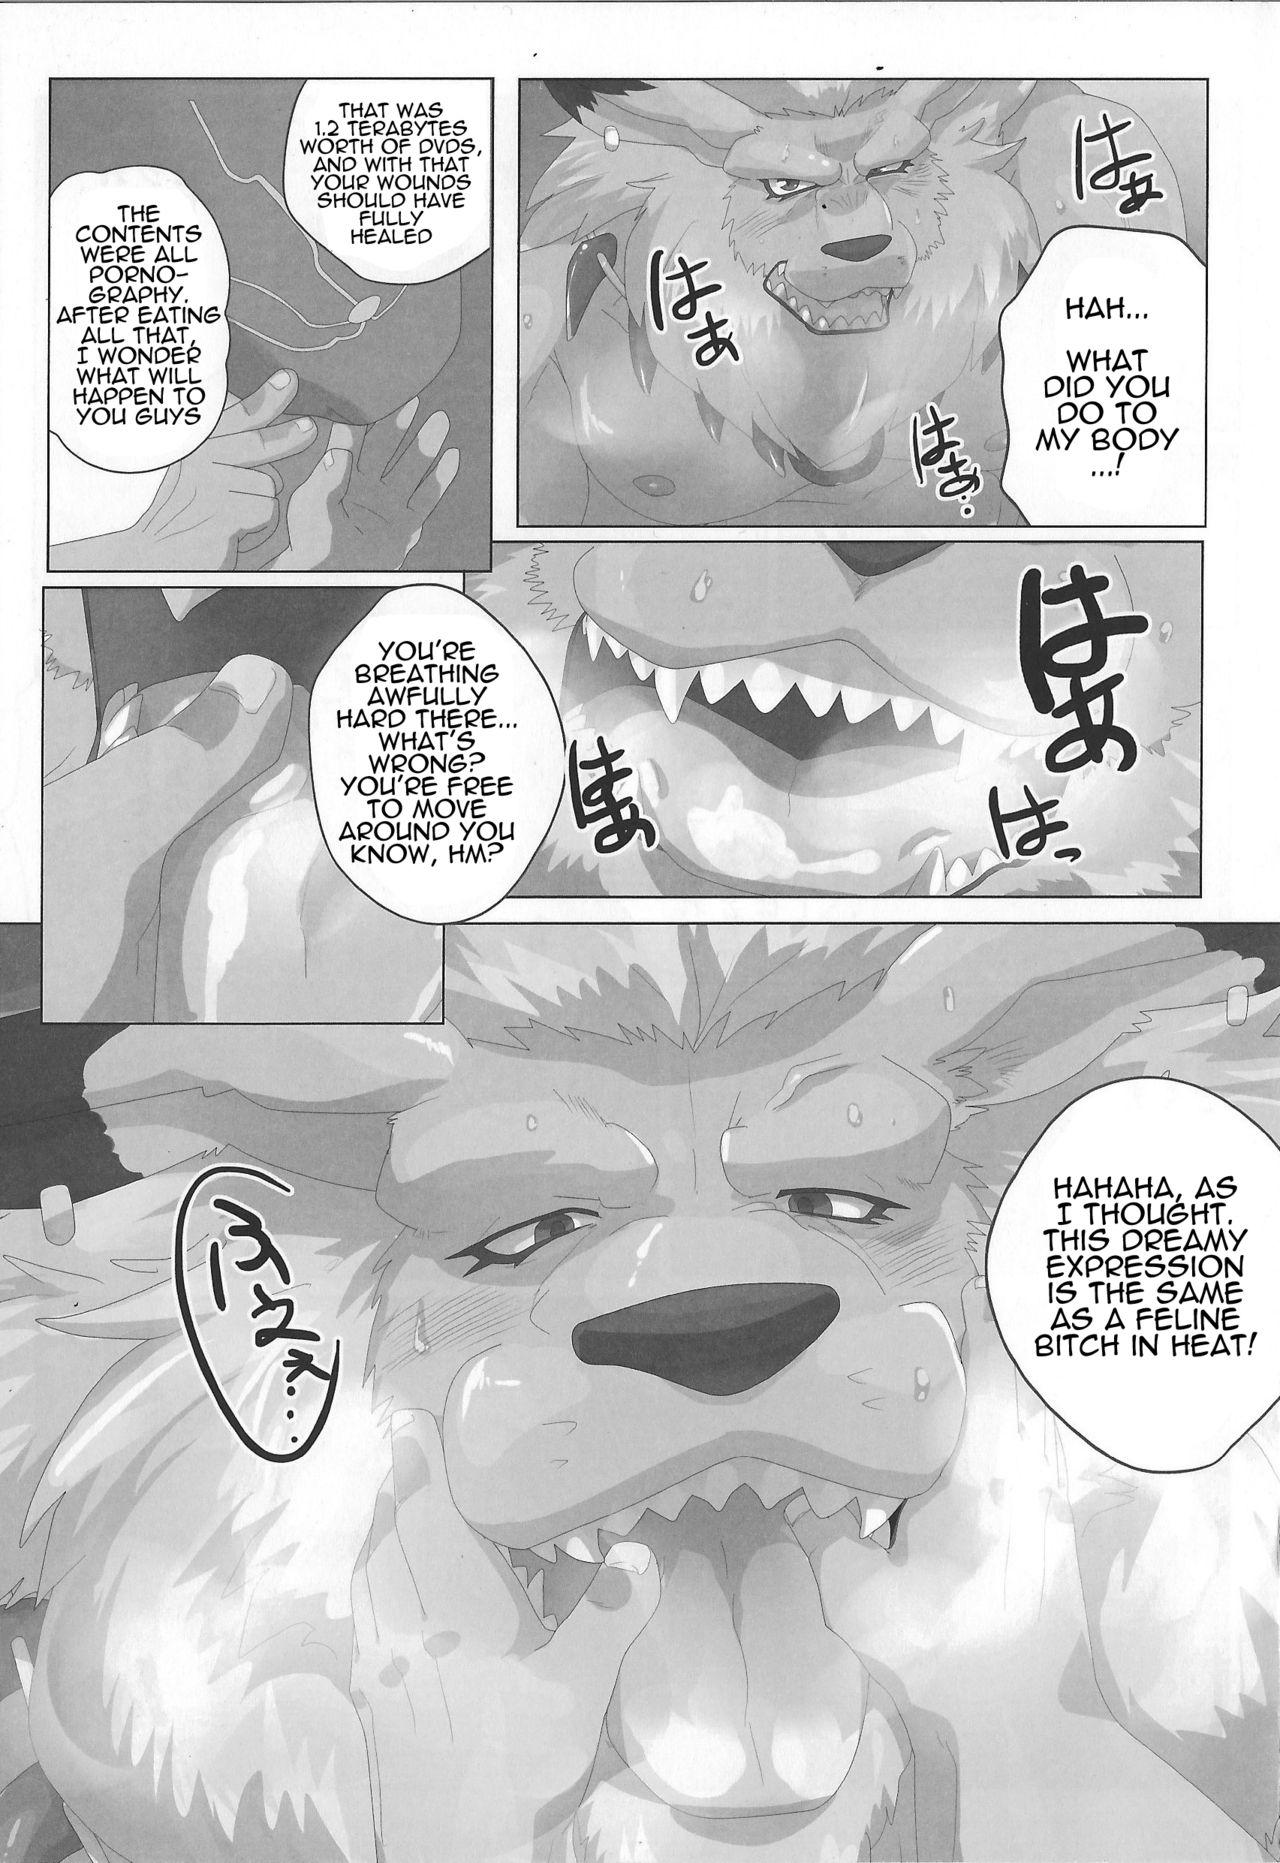 Black Thugs [Debirobu] For the Lion-Man Type Electric Life Form to Overturn Fate - Leomon Doujin [ENG] - Digimon Sucks - Page 9